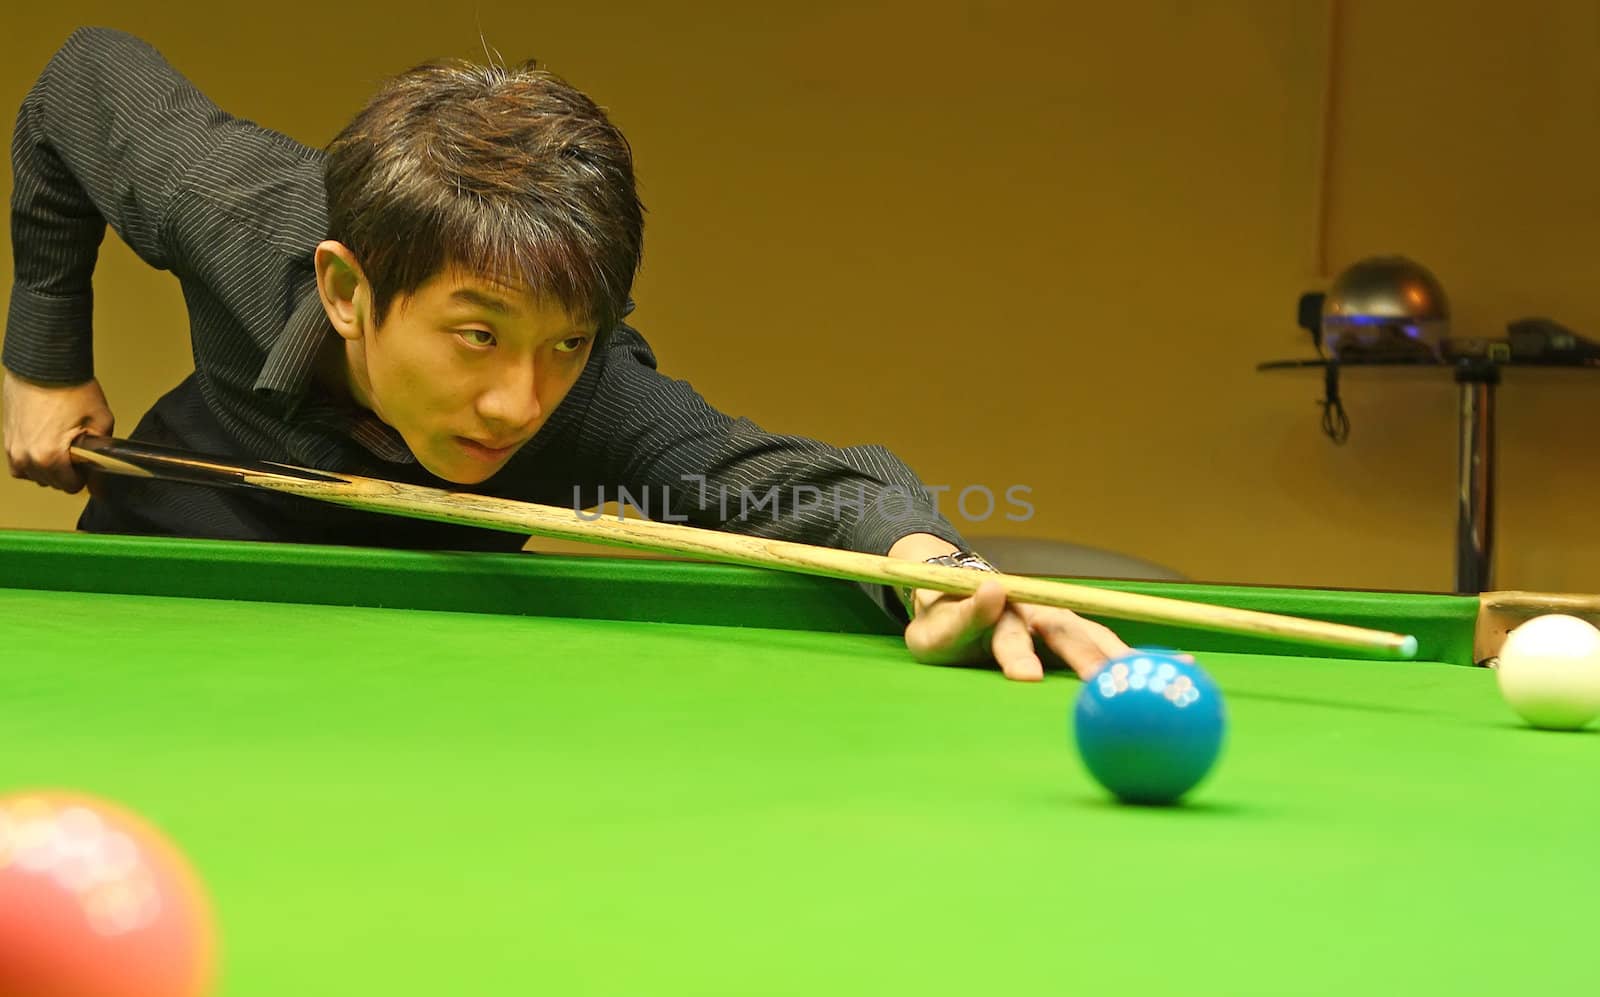 Young man concentrating while aiming at pool ball while playing billiards. 